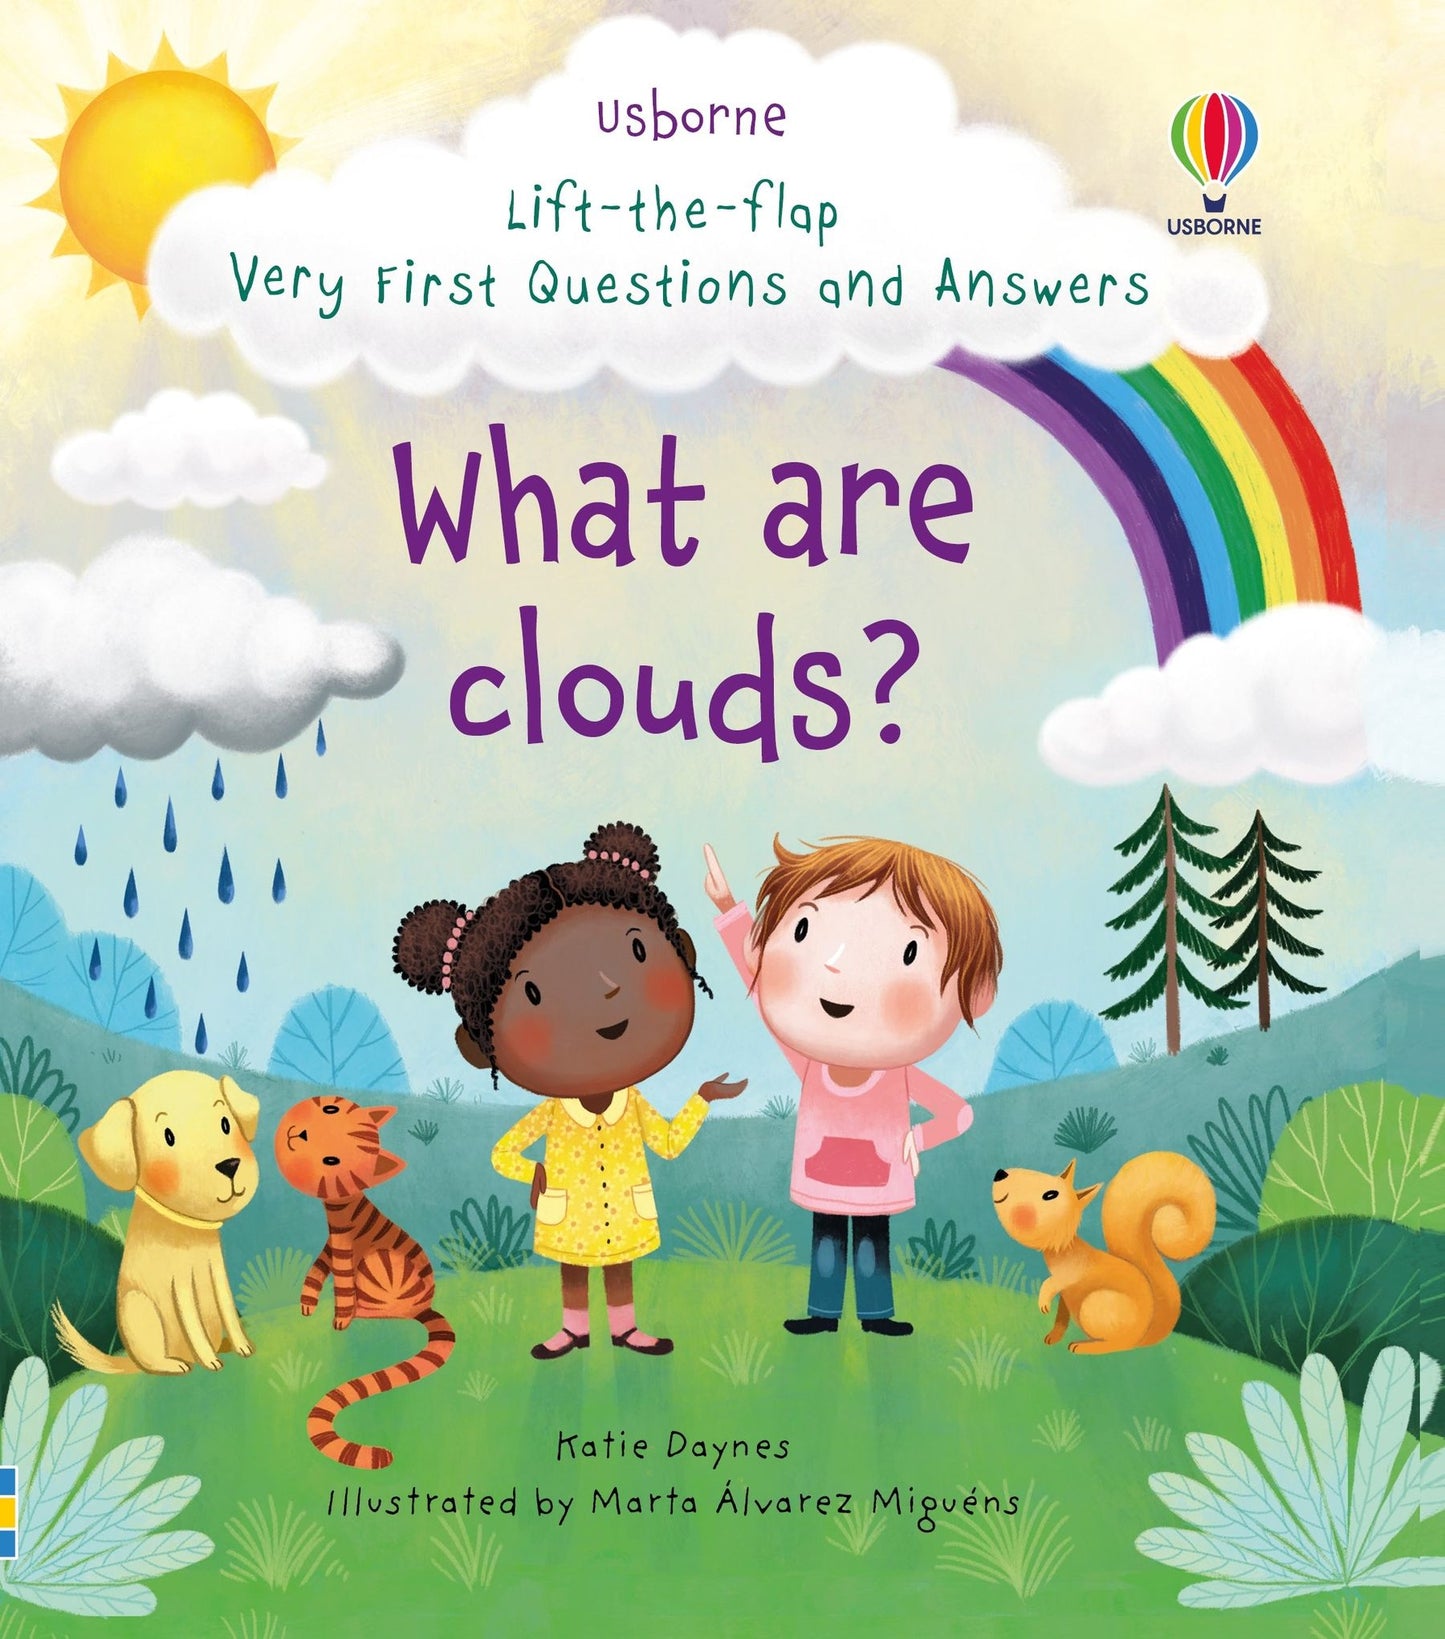 Very First Questions and Answers: What are Clouds?